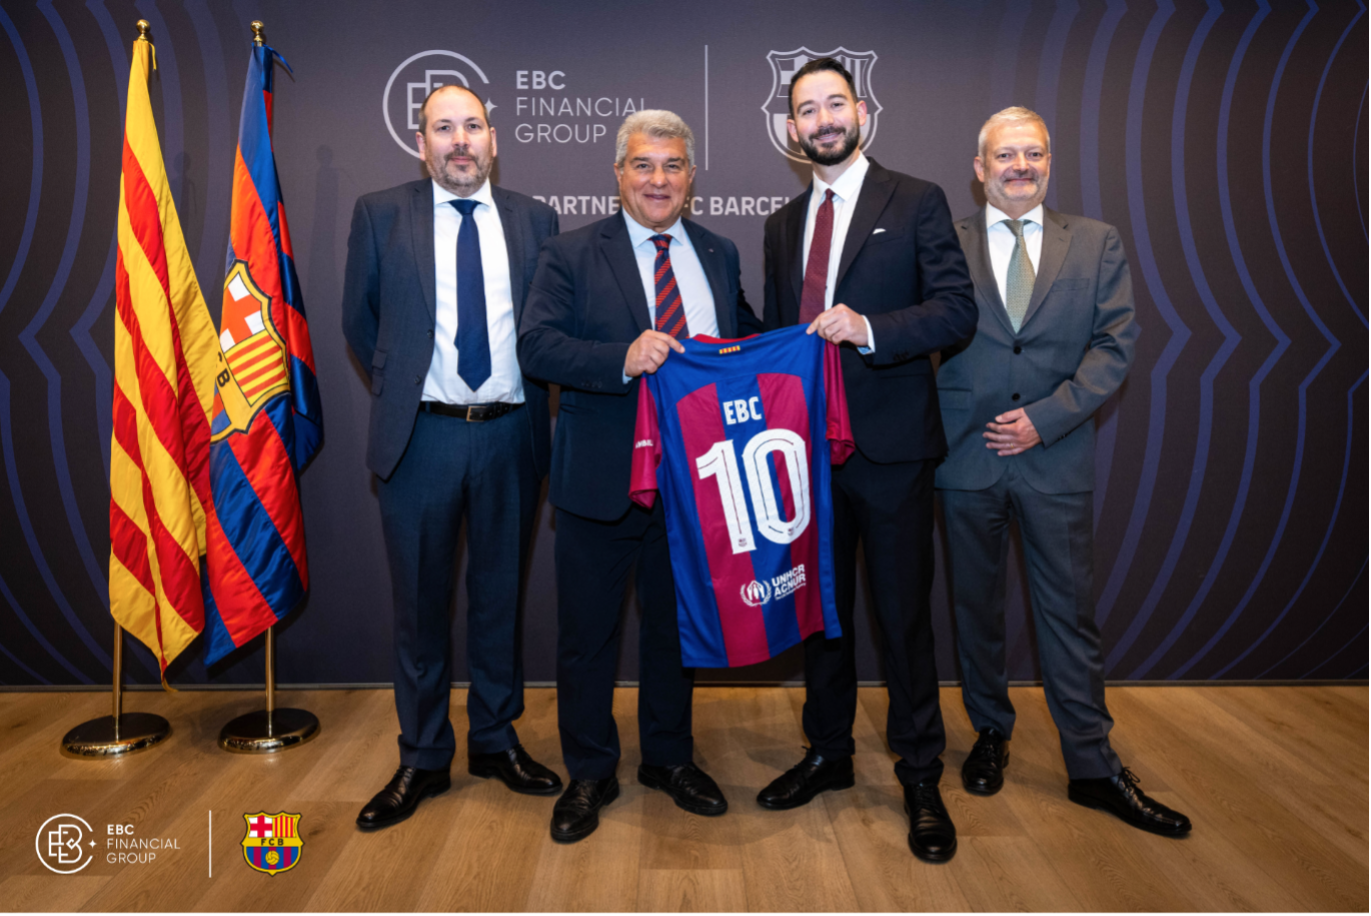 EBC Financial Group and FC Barcelona, alongside President Joan Laporta, celebrate the union of finance and football with a ceremonial jersey exchange.